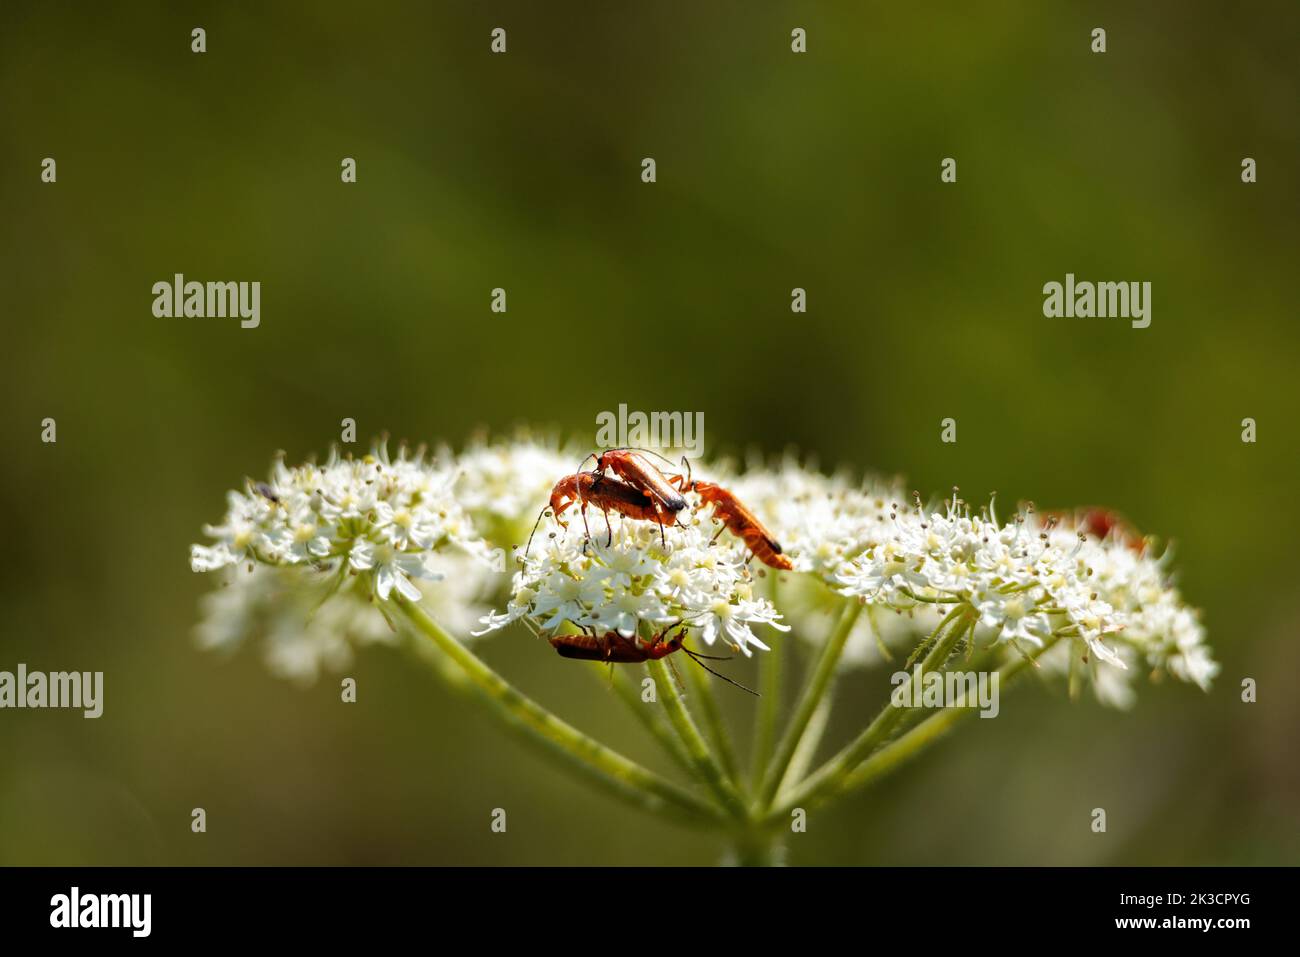 A close-up shot of red beetles on seseli white flowers Stock Photo